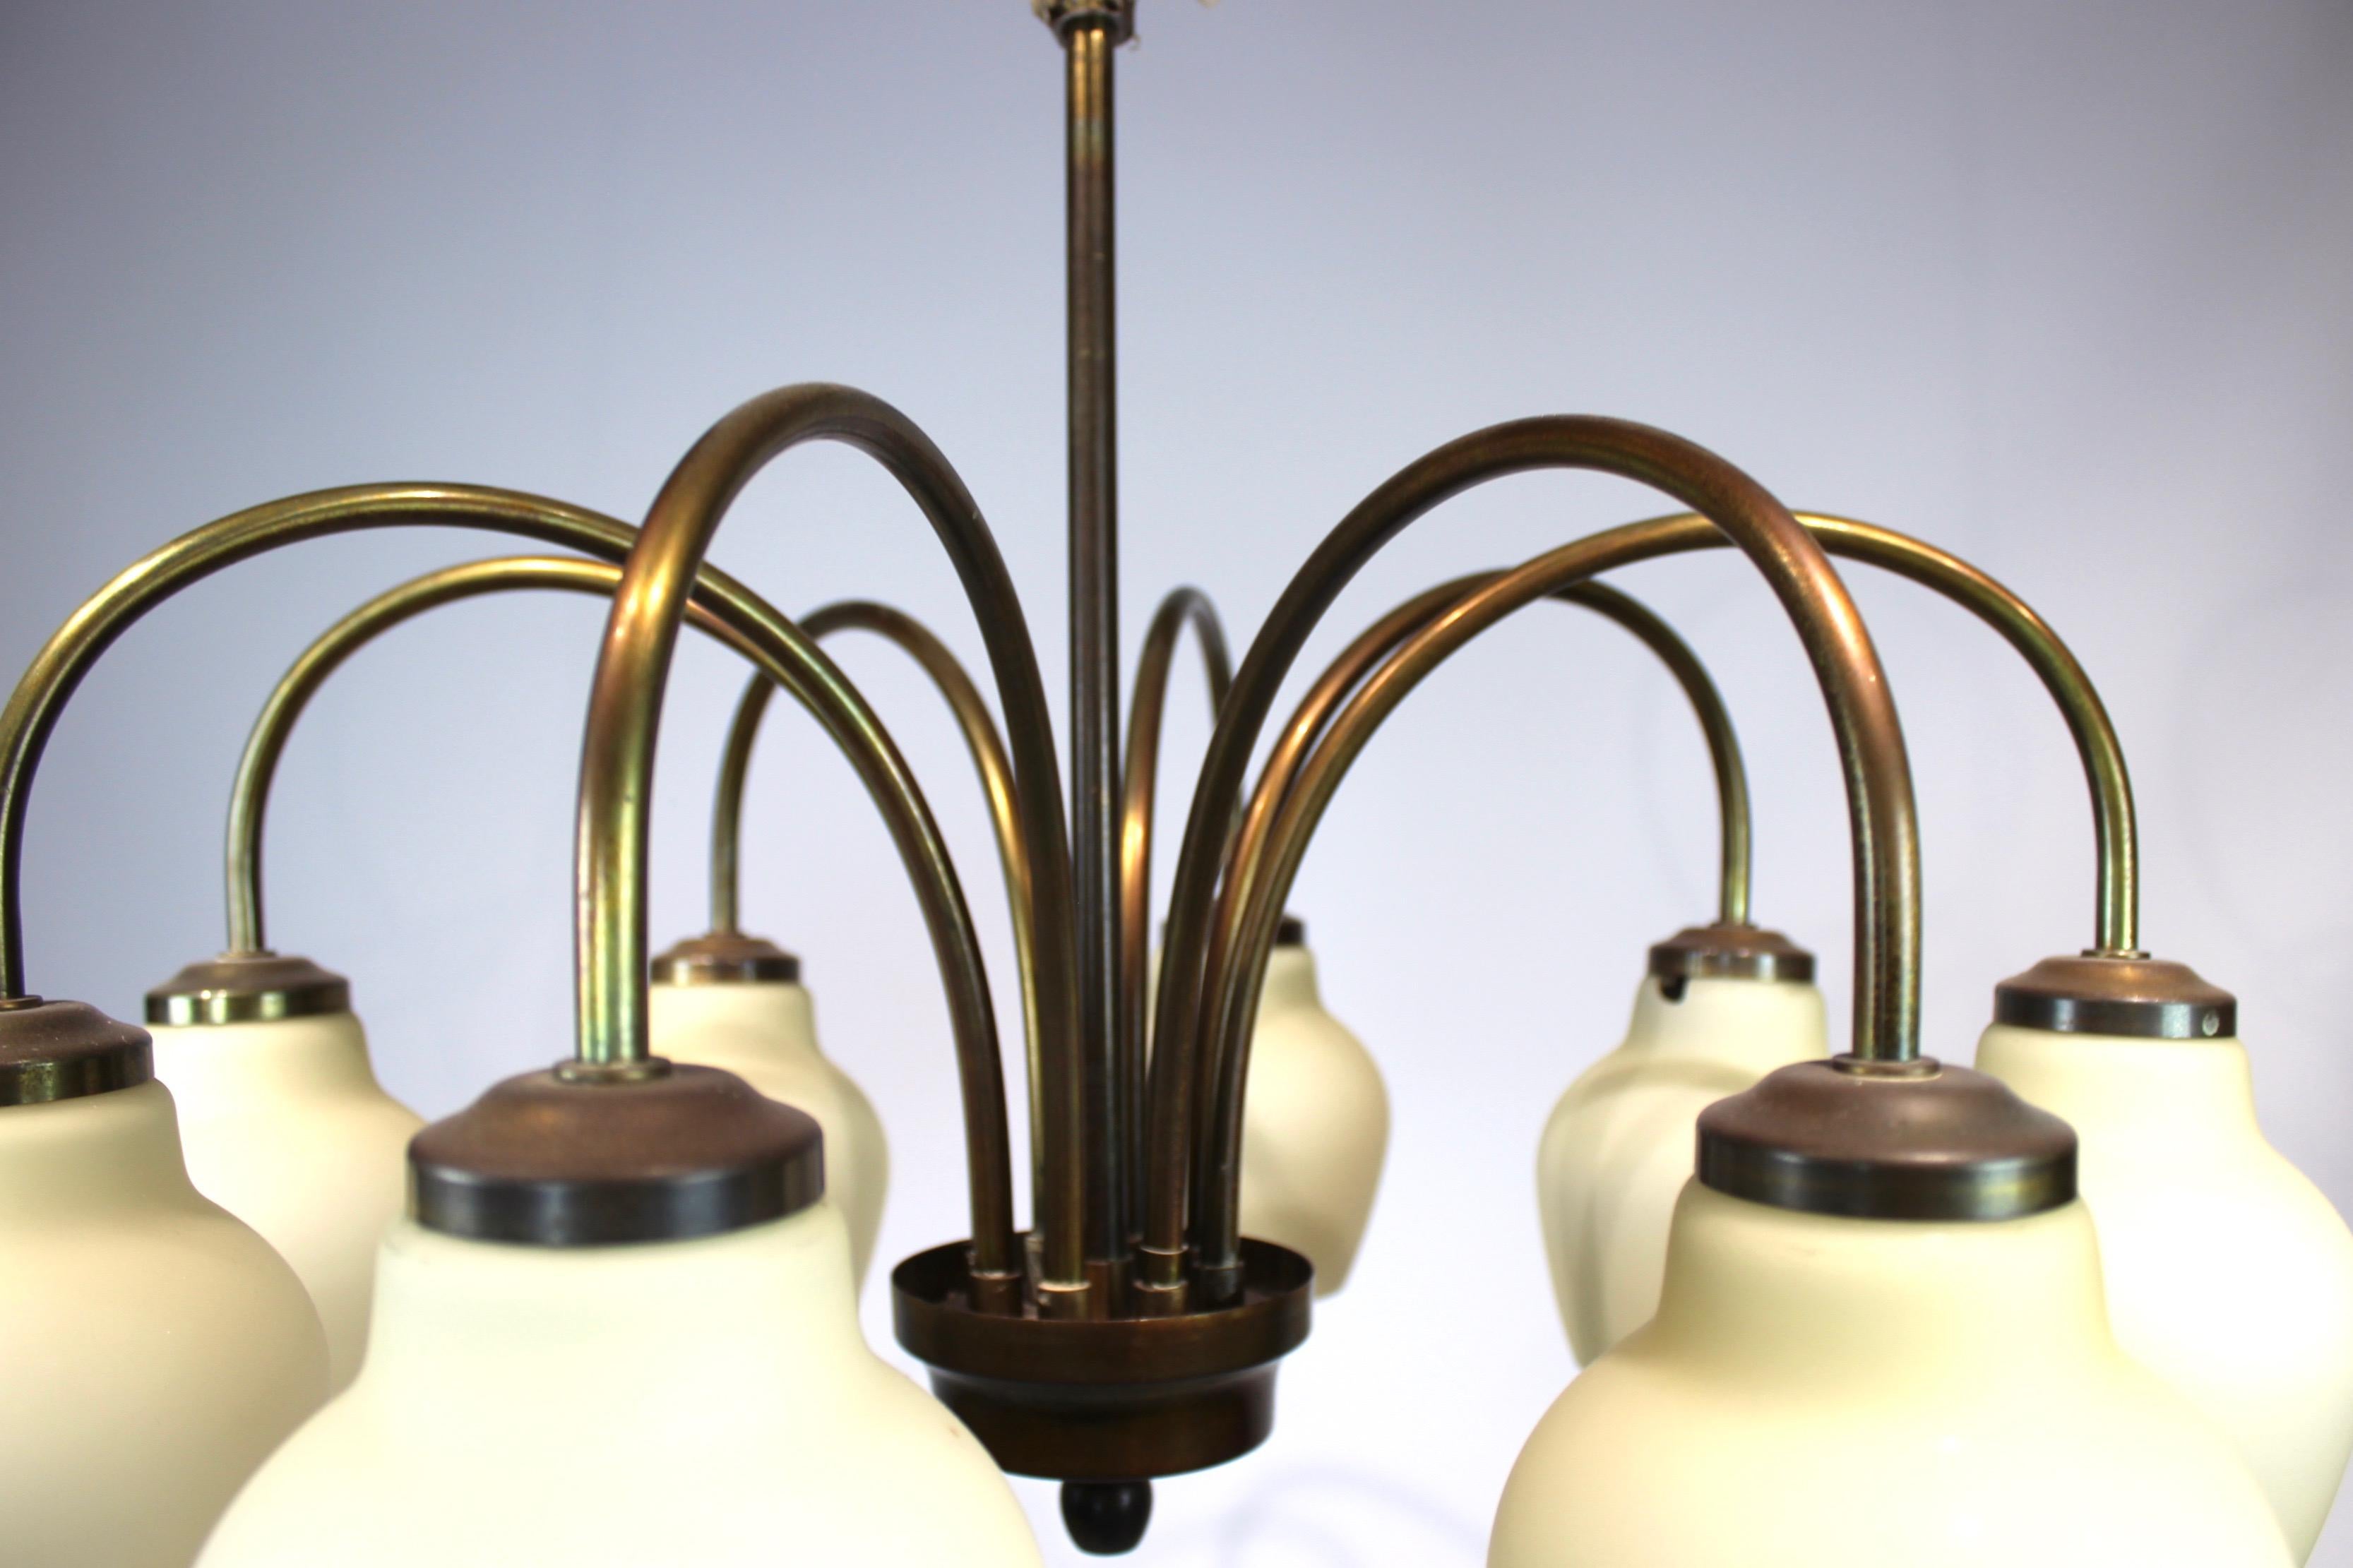 Chandelier or ceiling pendant of brass and light yellow shades by Fog & Mørup from the 1960s. The lamp is in great vintage condition.